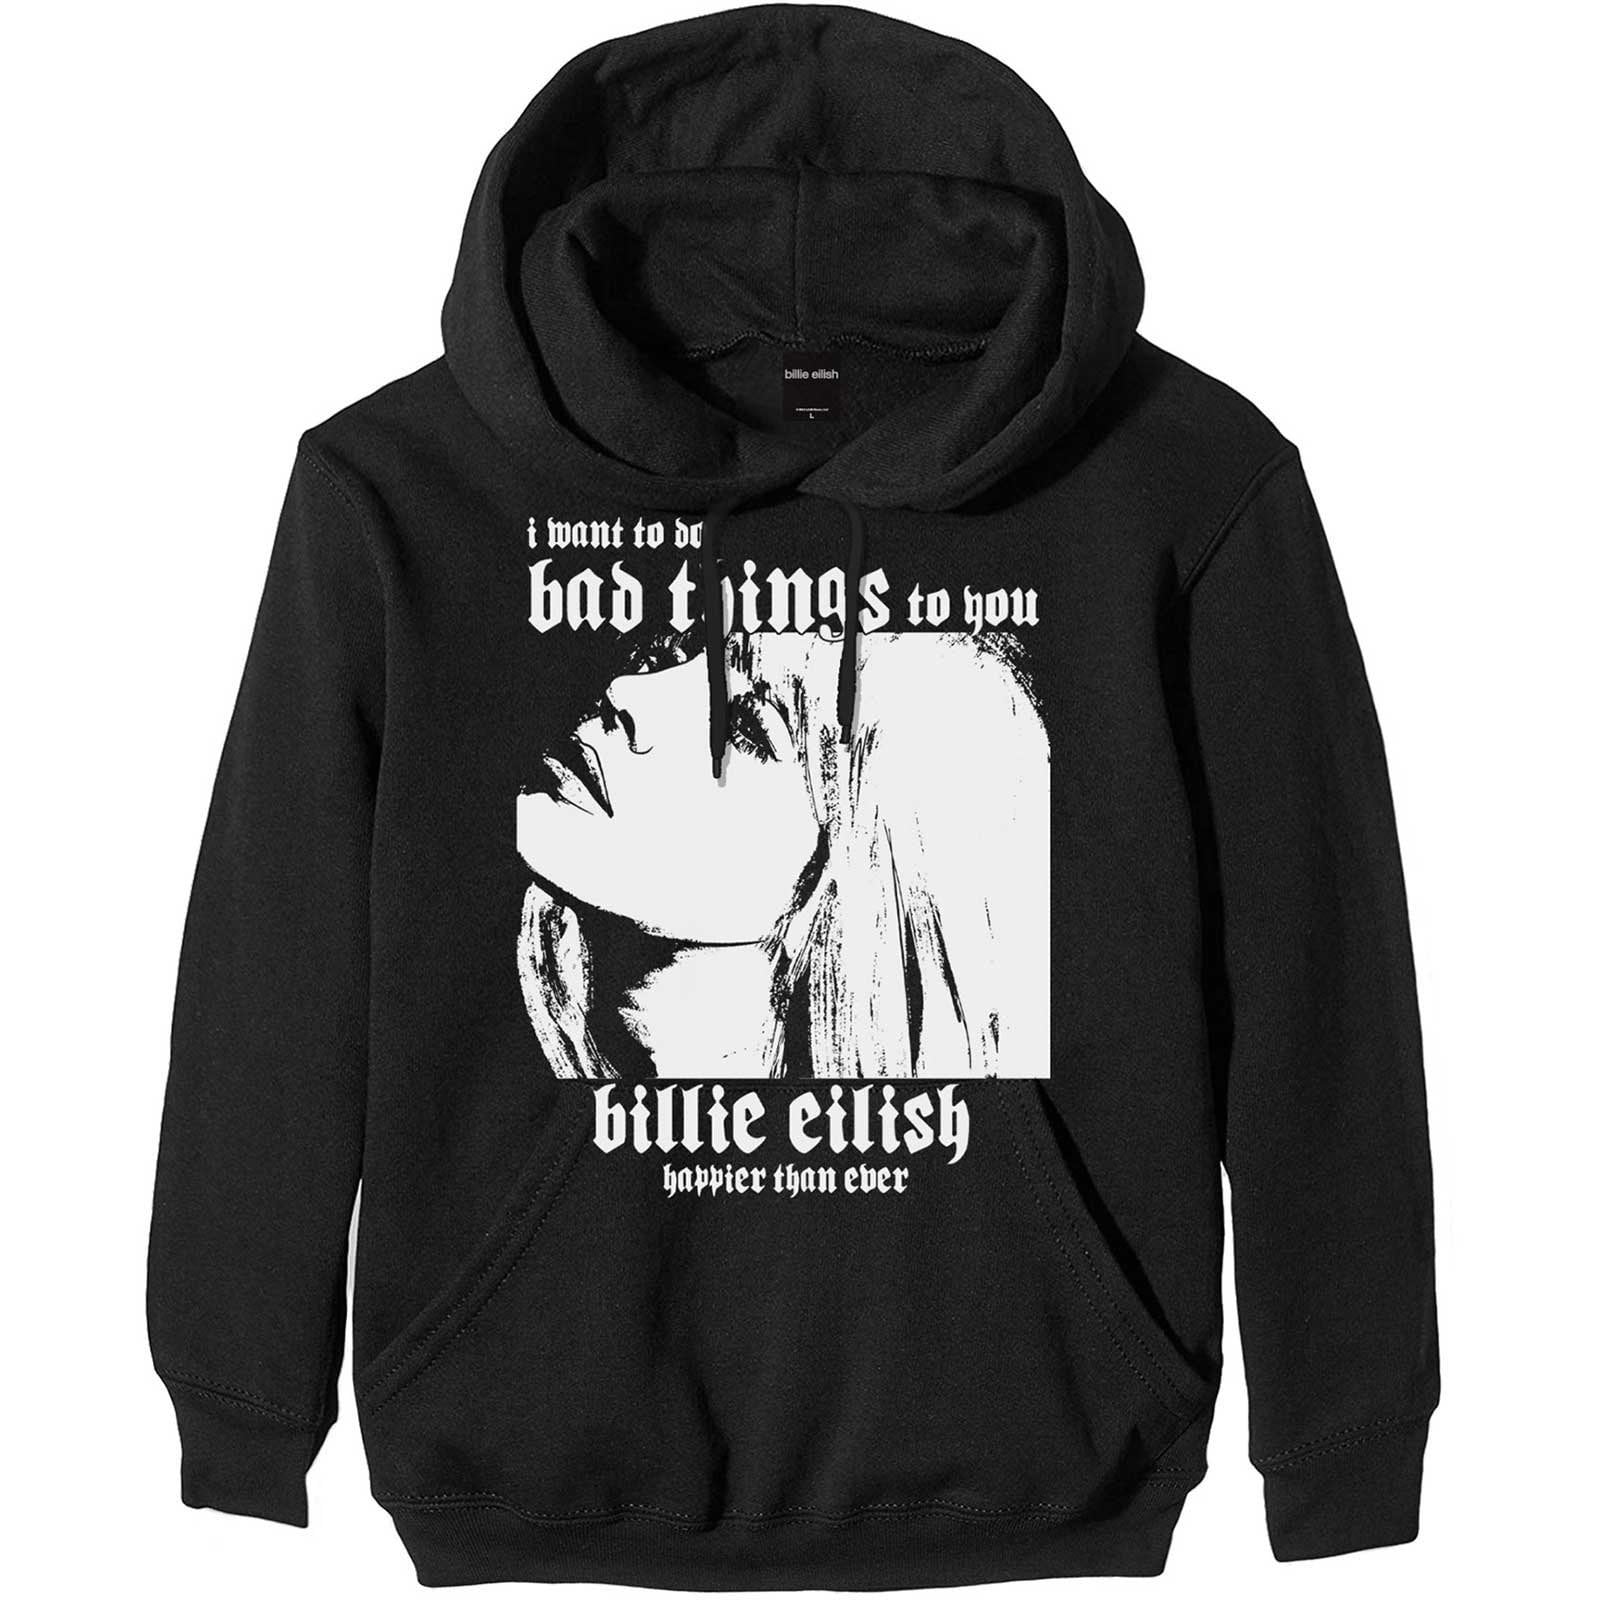 Billie Eilish Unisex Hoodie - Bad Things - Official Licensed Design - Worldwide Shipping - Jelly Frog